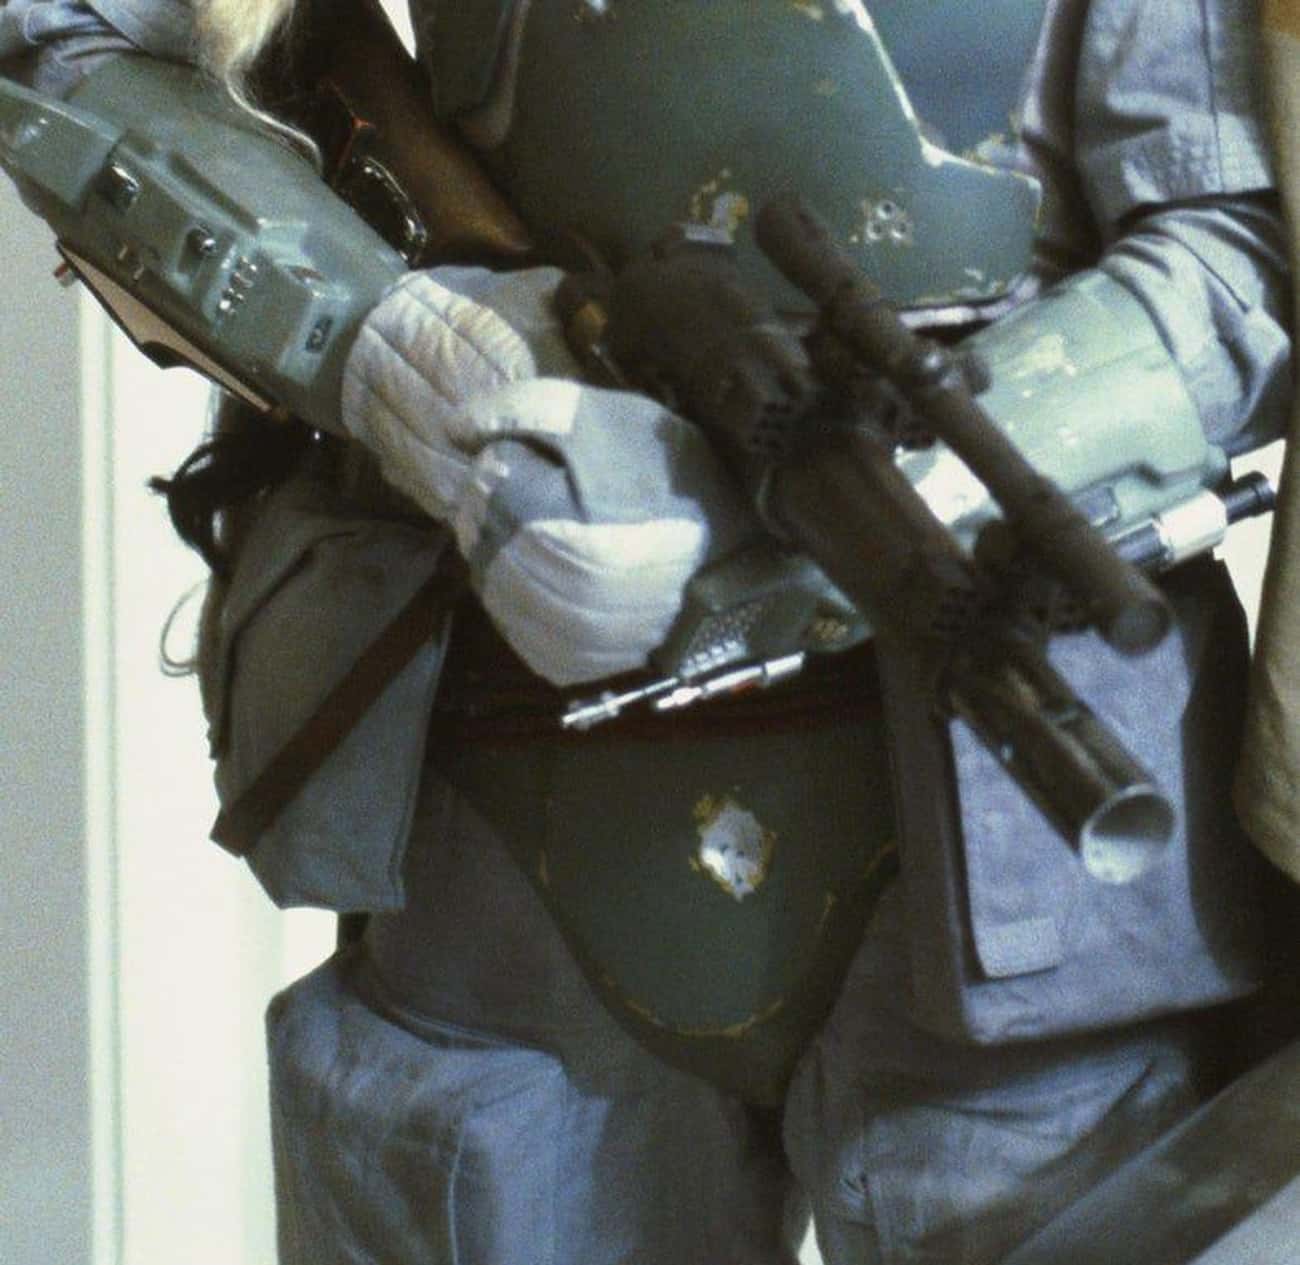 Among all the scratches and dents and other damage on Boba Fett's armor, there is a very noticeable chip on his 'cup.' Which means someone has canonically shot Boba Fett in the crotch at some point.